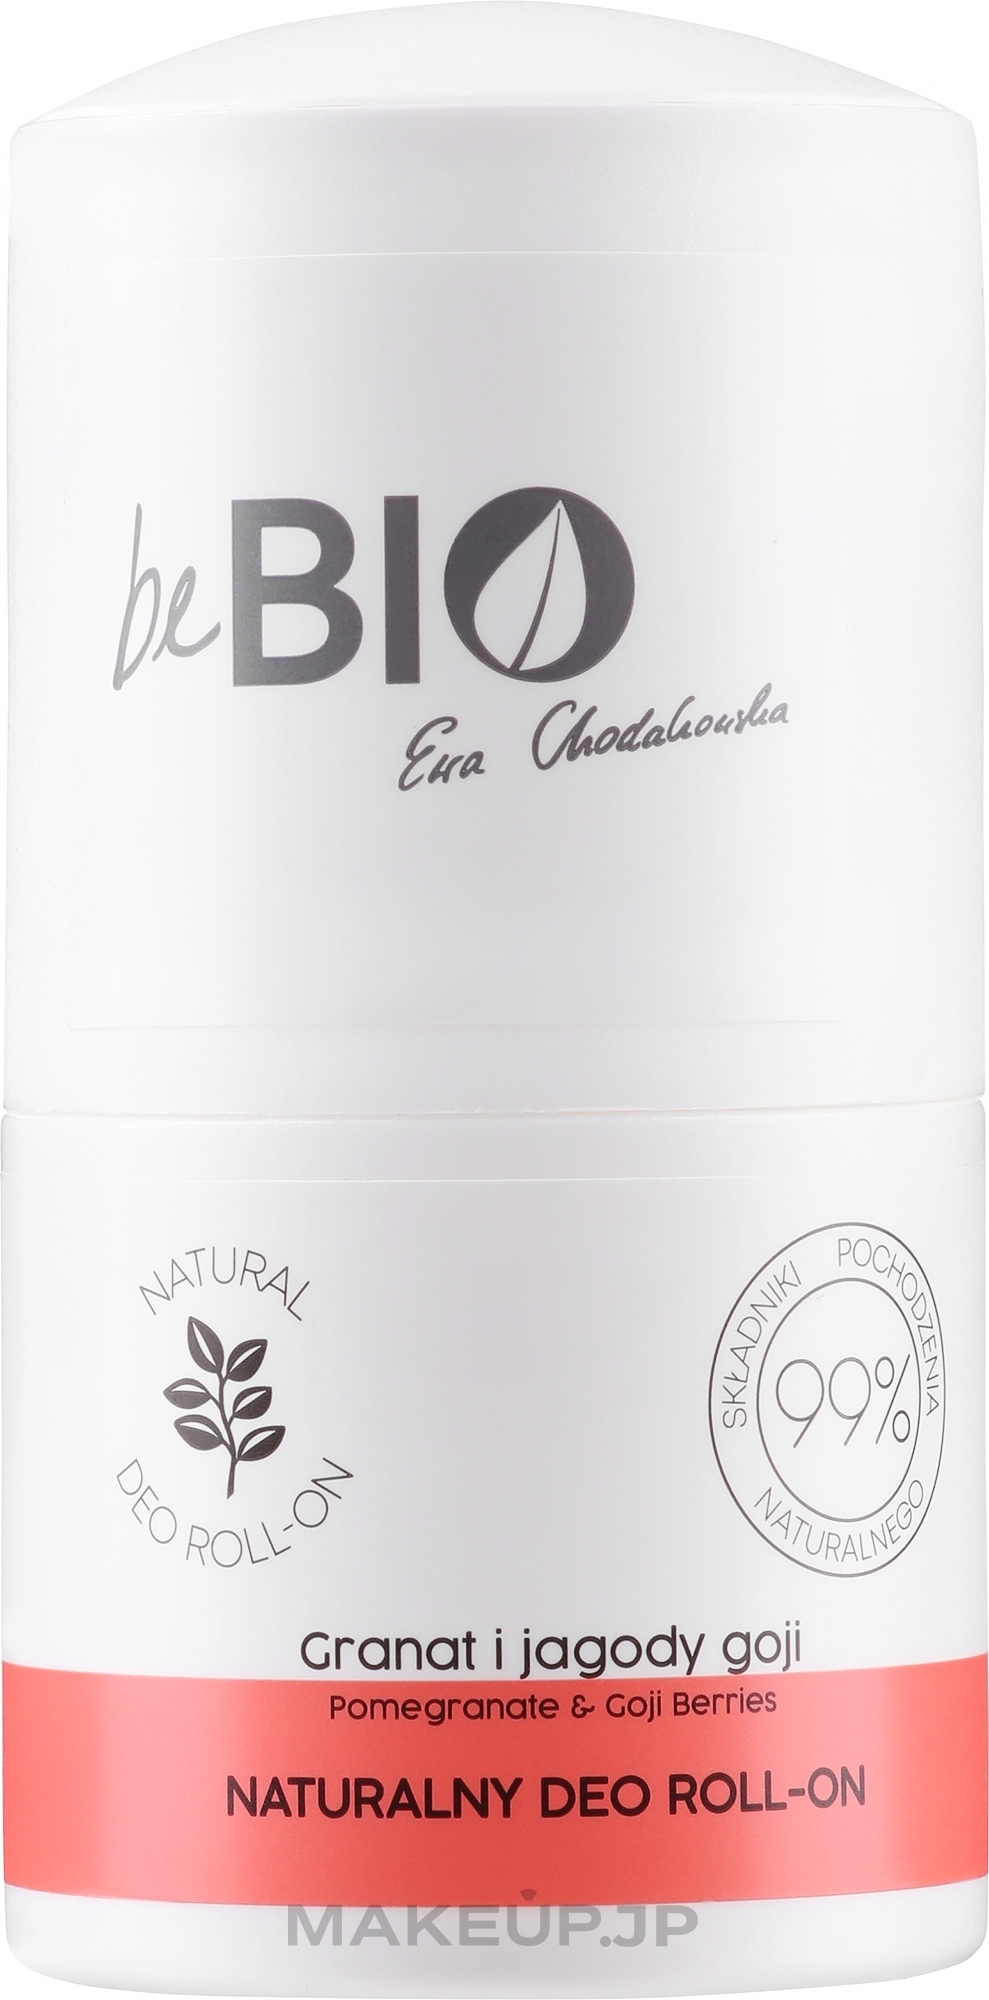 Roll-on Deodorant "Pomegranate and Goji Berries" - BeBio Natural Pomegranate & Goji Berries Deodorant Roll-On — photo 50 ml